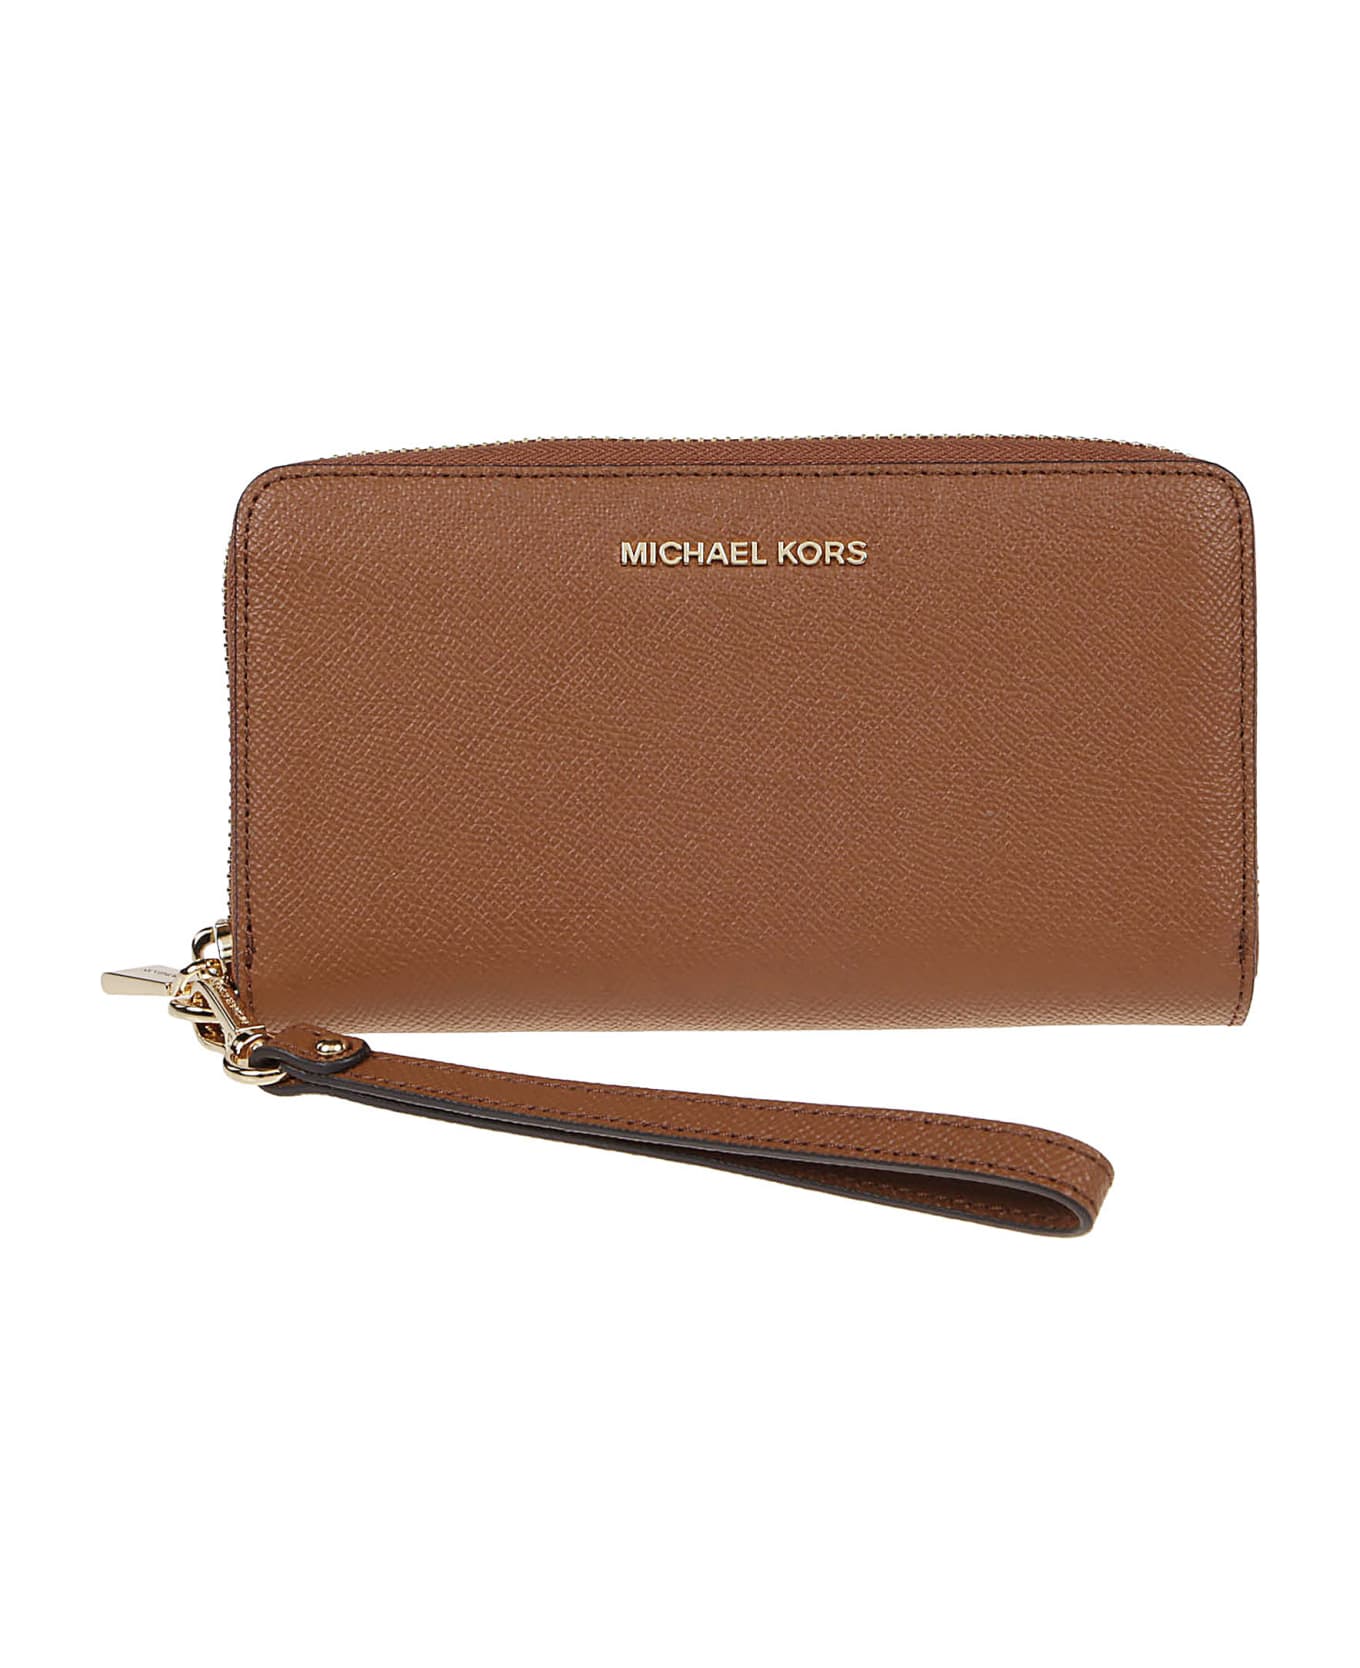 Michael Kors Large Coin Phone Case - Luggage